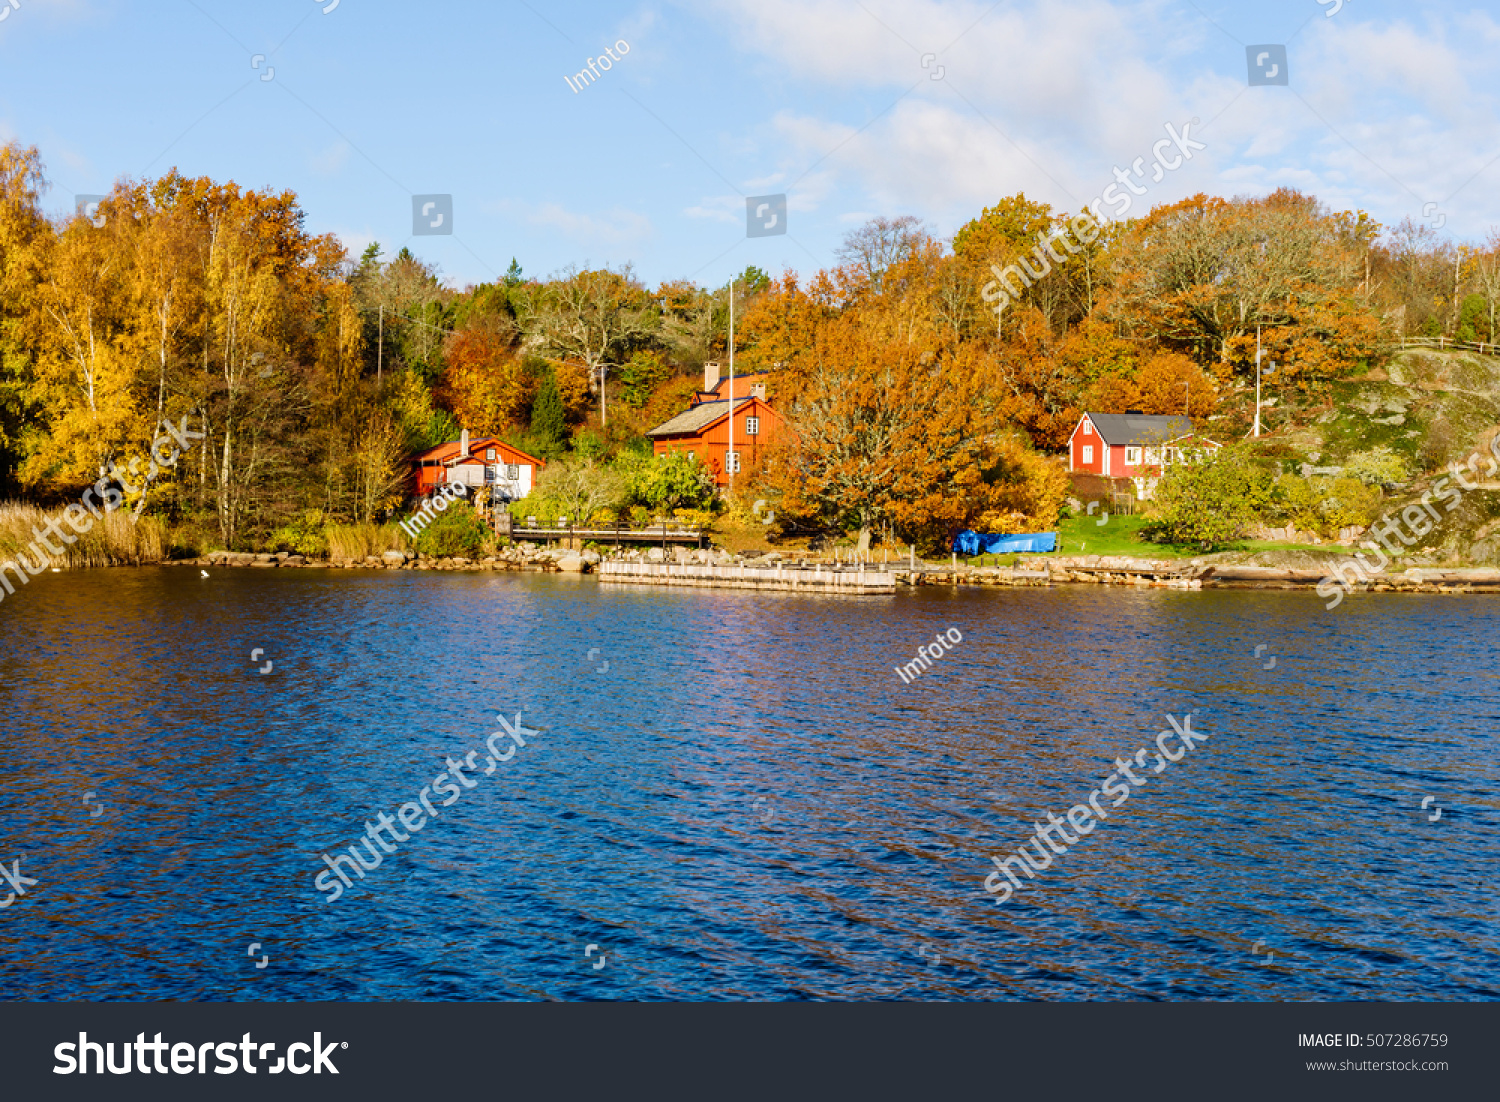 Jarnavik, Sweden - October 25, 2016: Environmental documentary of coastal lifestyle. Seaside homes with private piers in fall. Colorful woodland in background. #507286759